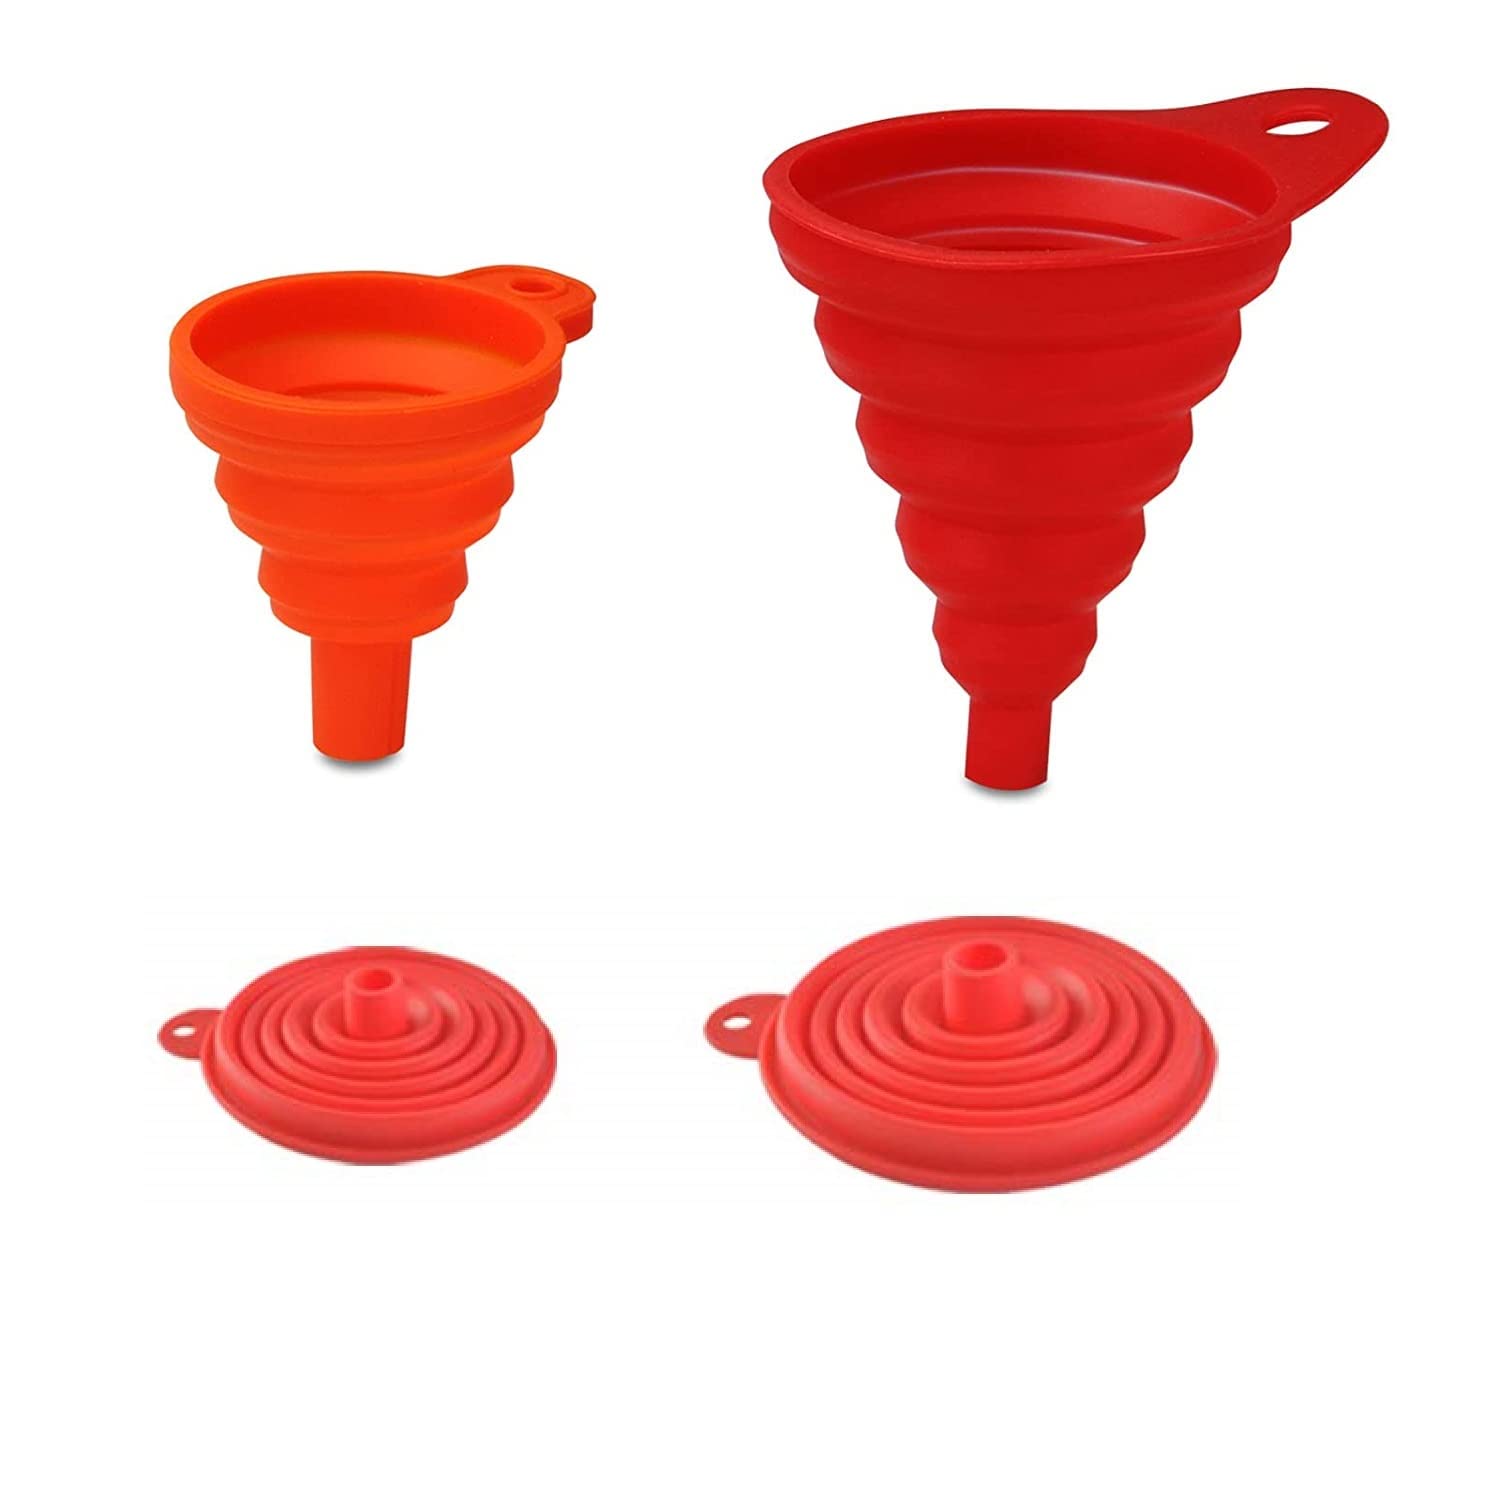 Great Choice Products Kitchen Canning Funnel Set Of 2, Premium Red Collapsible Silicone Food Funnels For Wide Mouth And Regular Mason Jars By